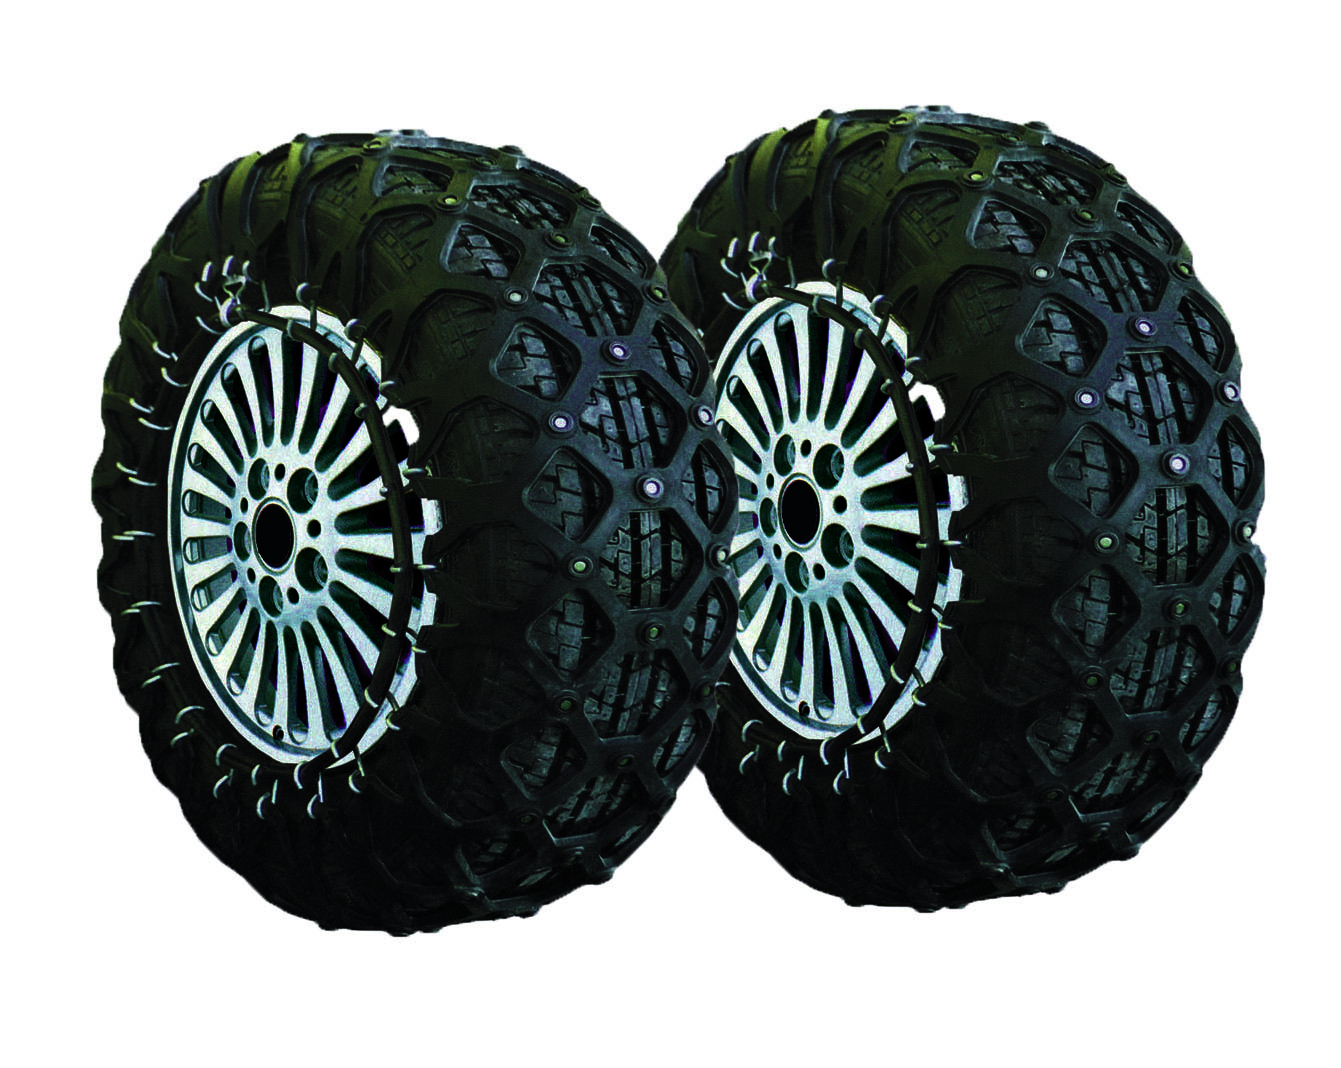 Jeremywell Anti Slip Natural Rubber Snow Tire Chain fits 215/75R16,225/65R17,245/55R18